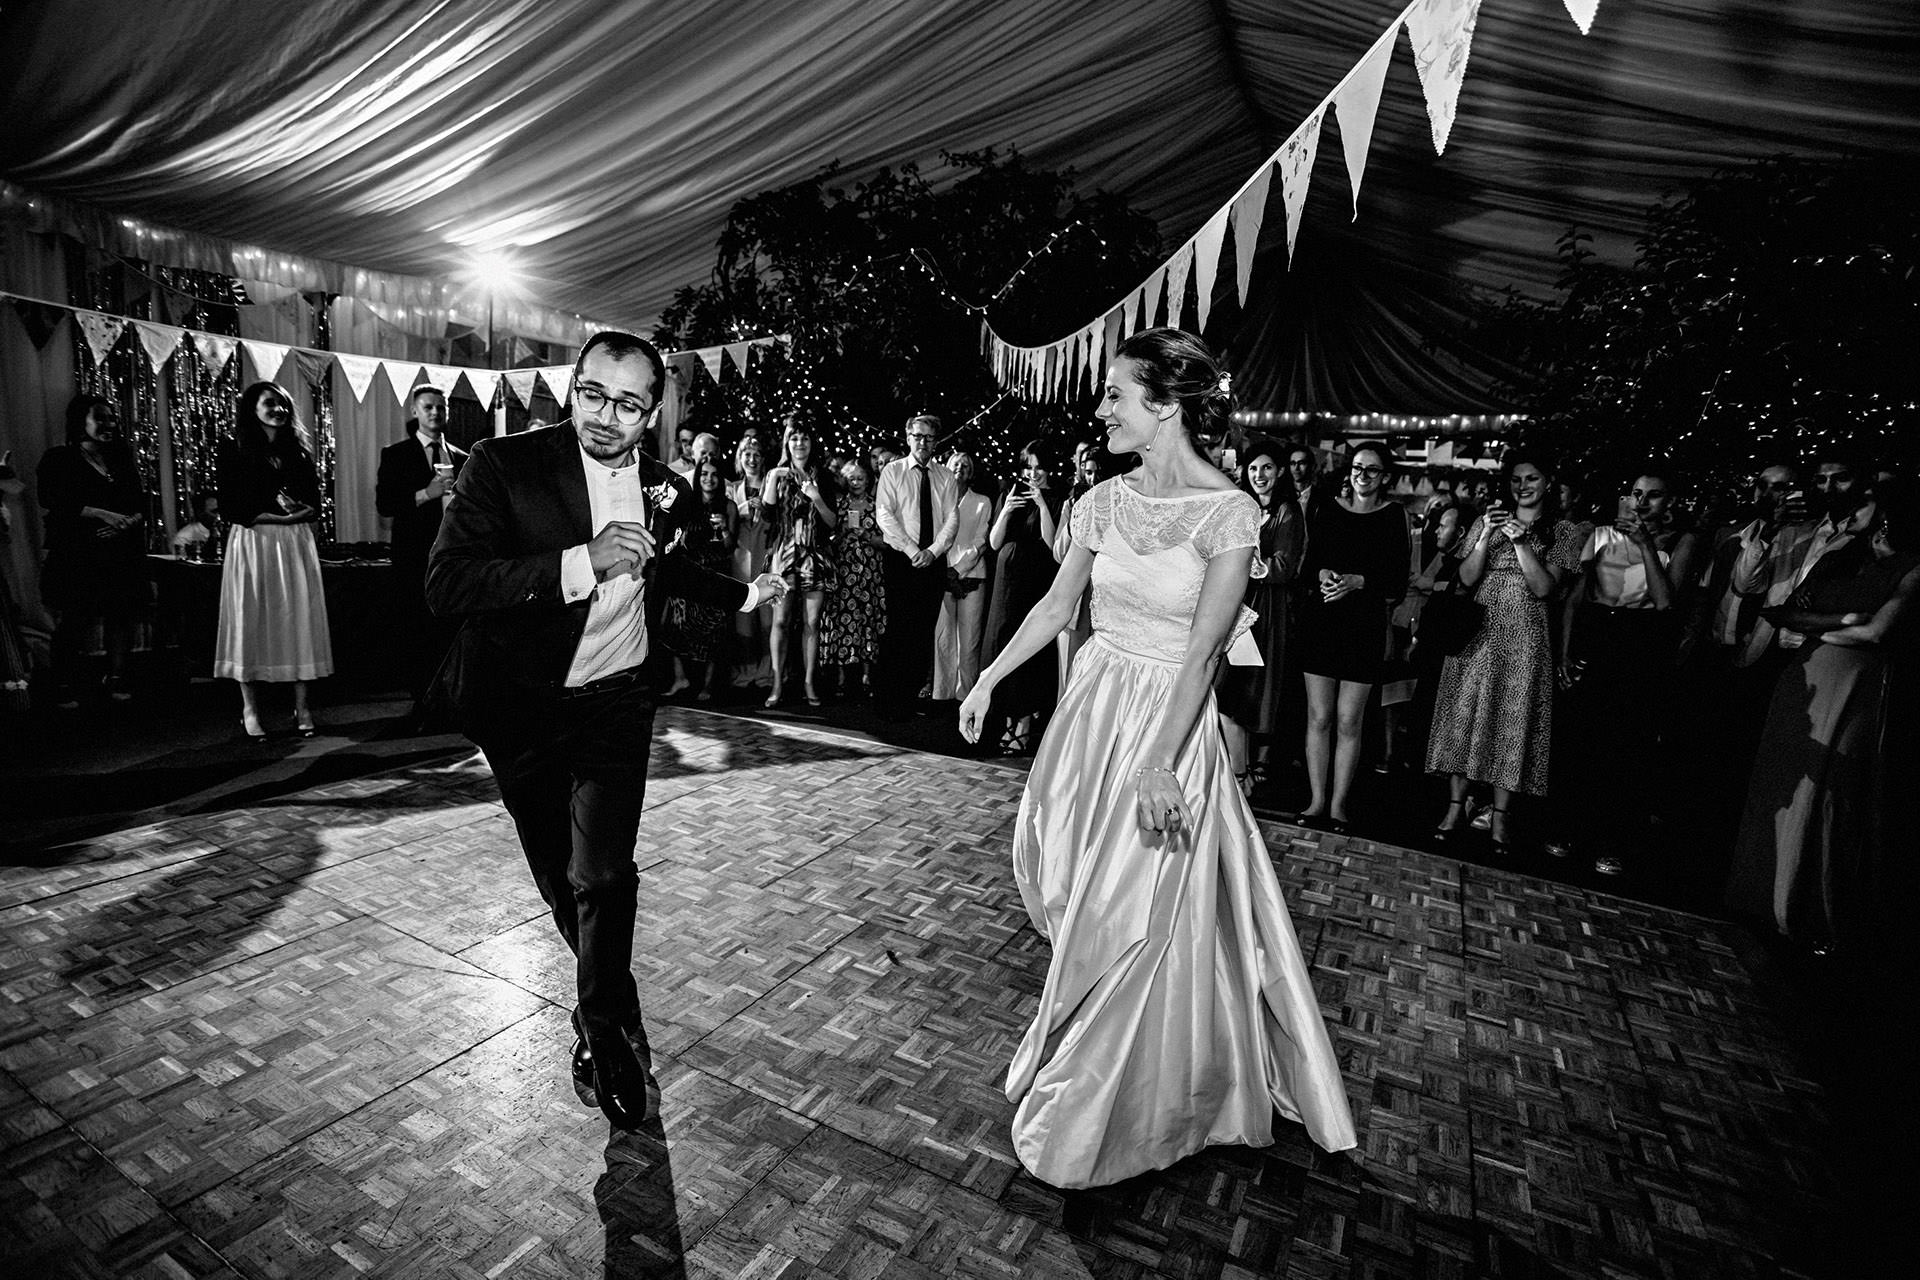 dancing in the marquee